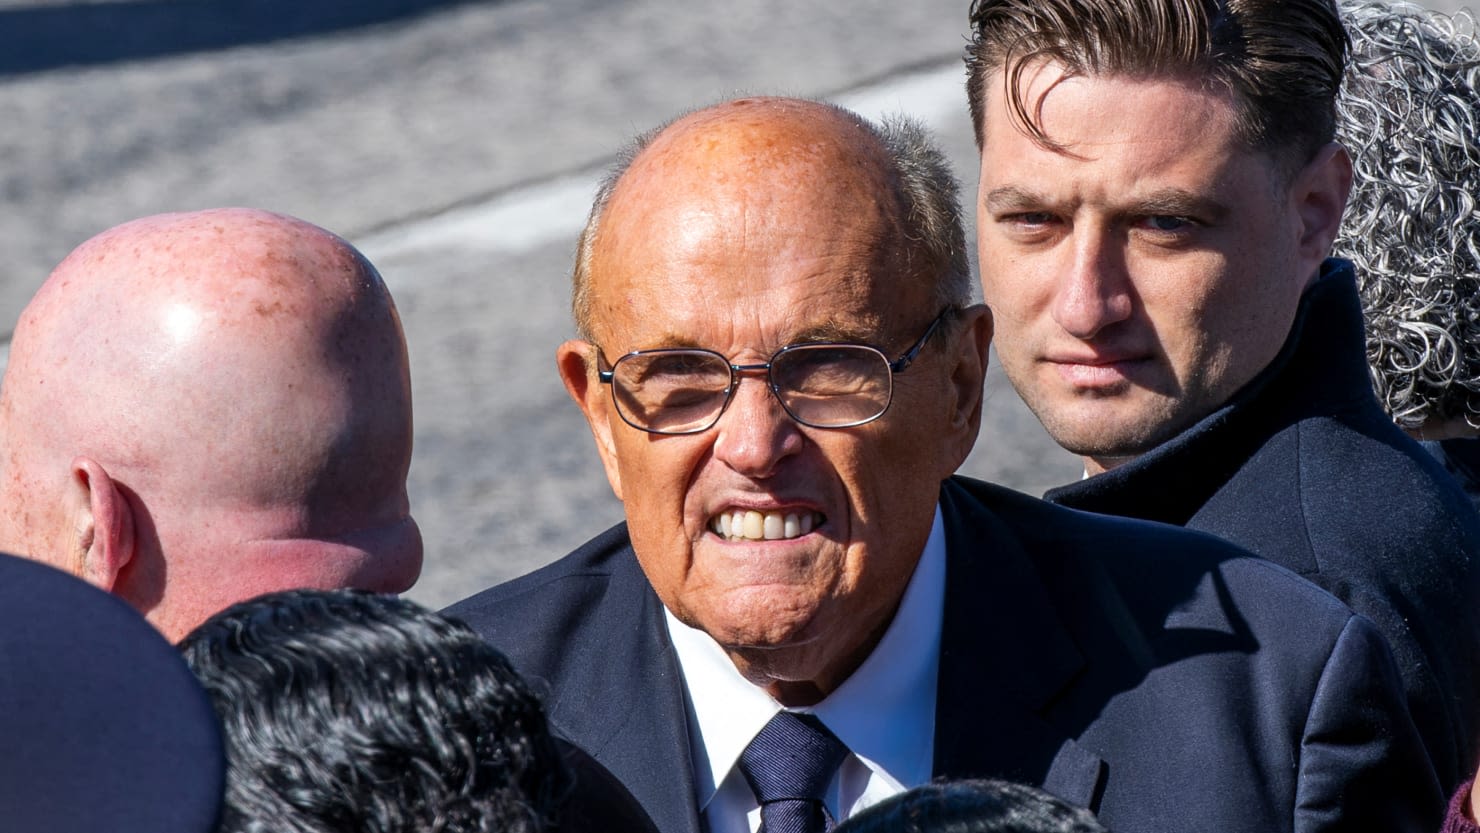 Rudy Giuliani’s Son Gave Him the Silent Treatment Over Alleged Fling